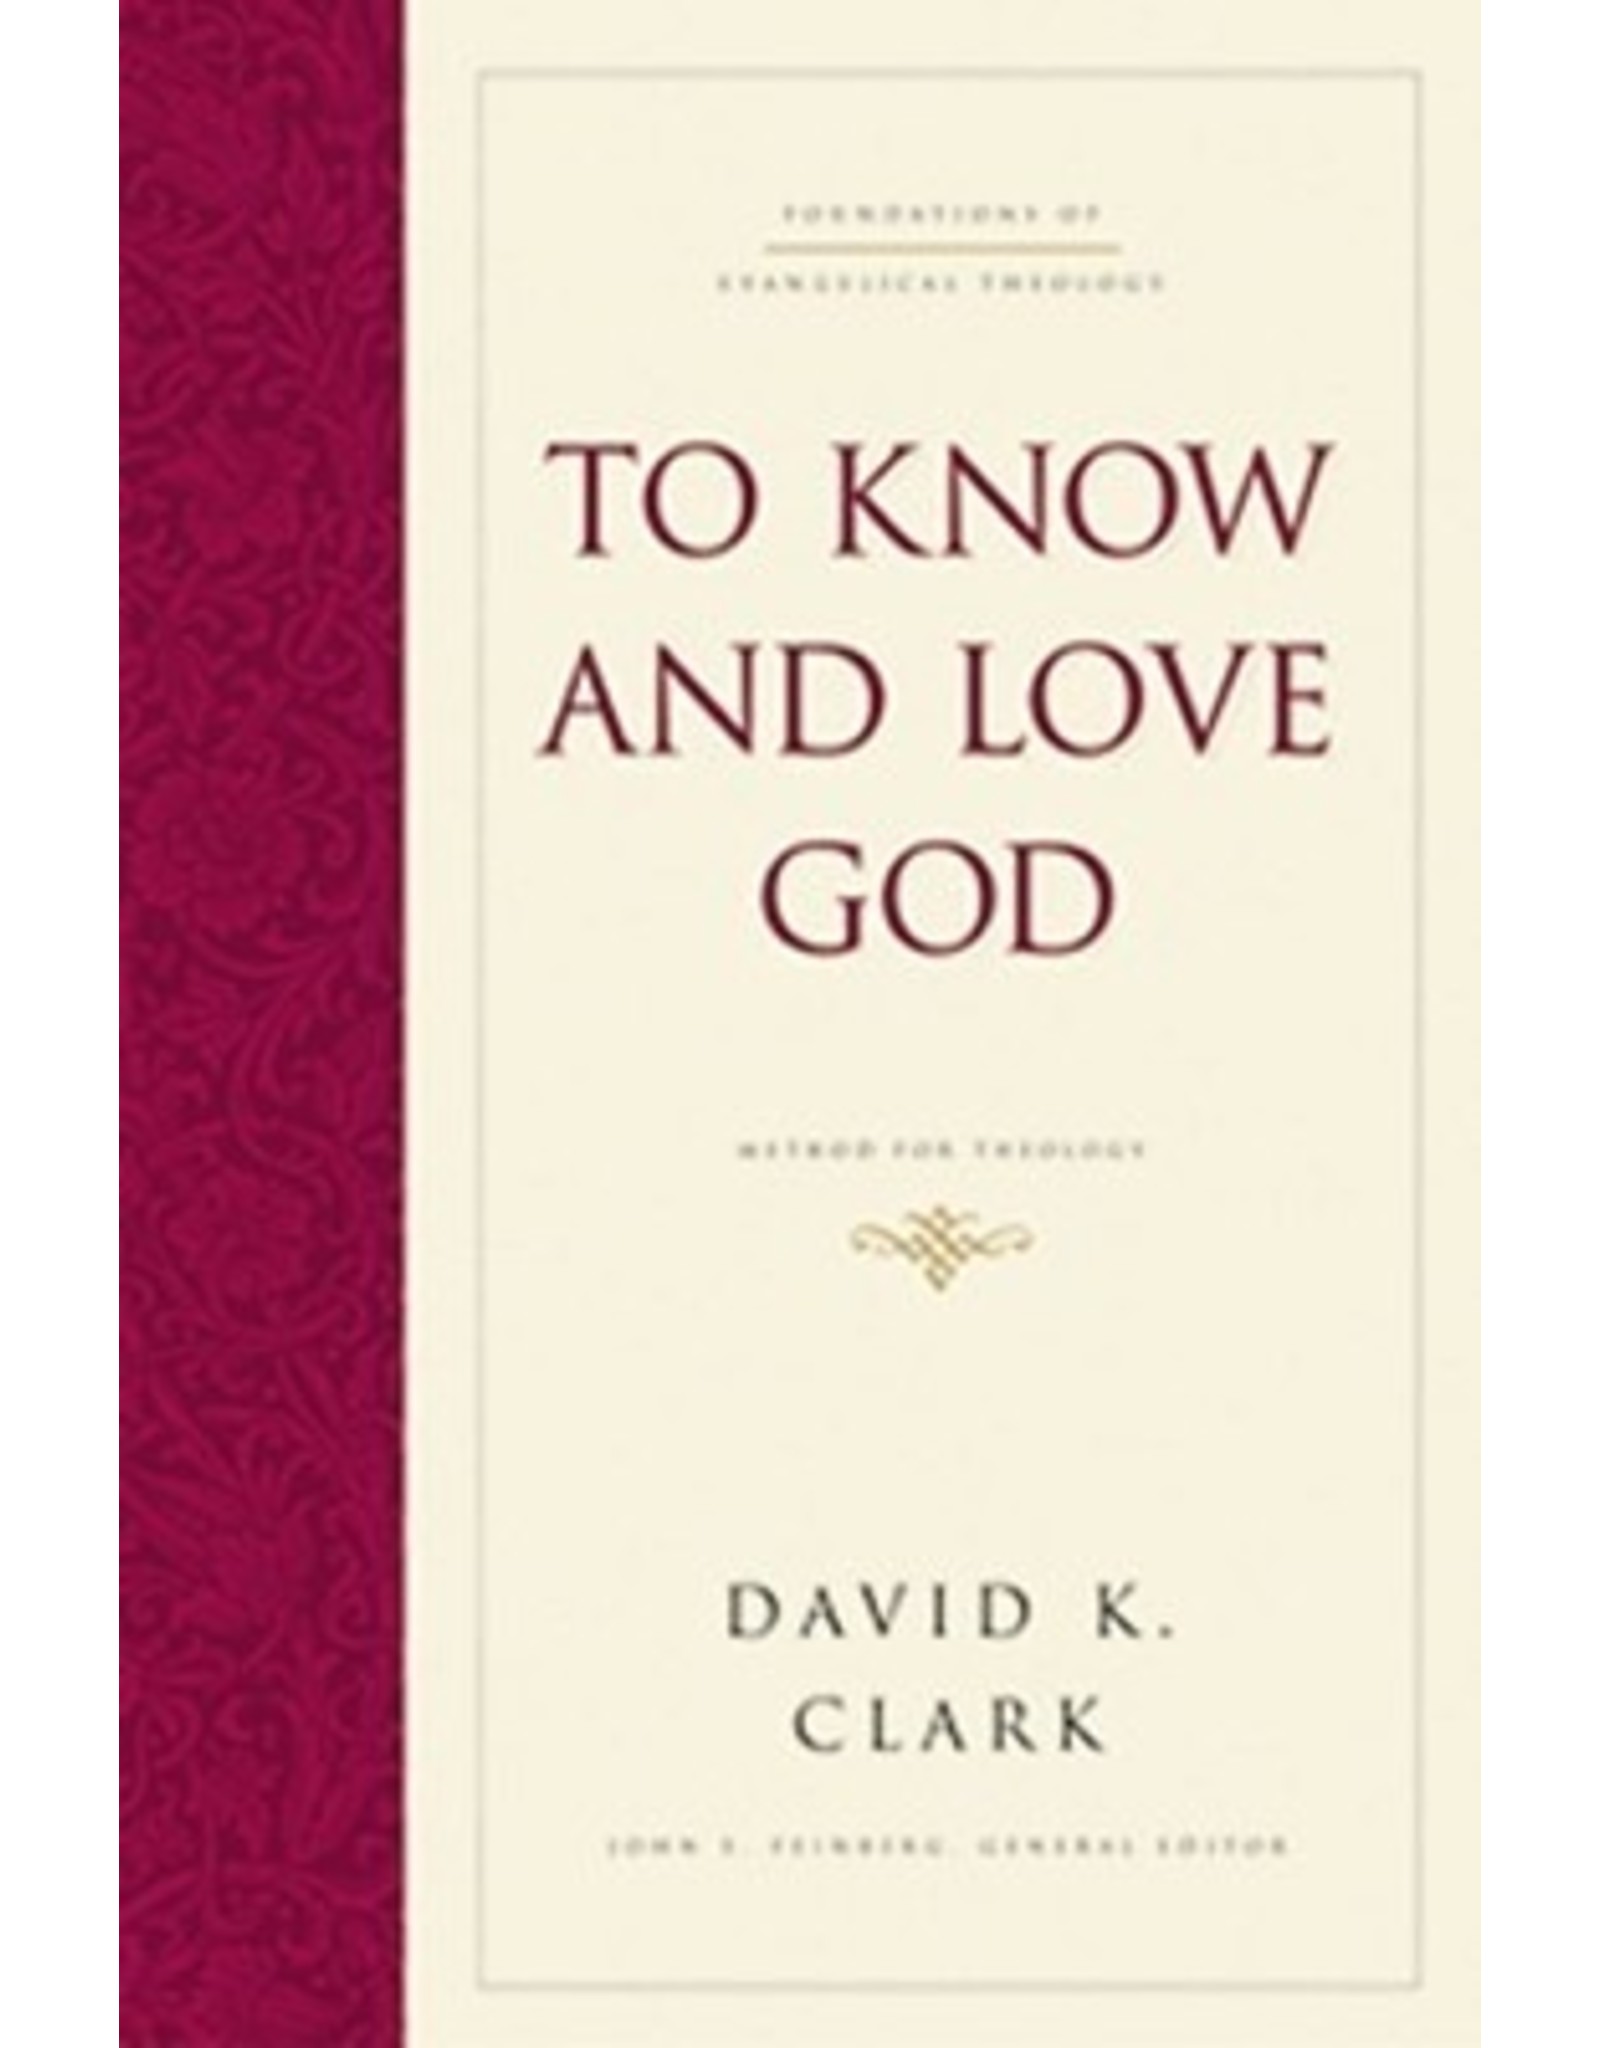 David K Clark To Know and Love God: Method for Theology